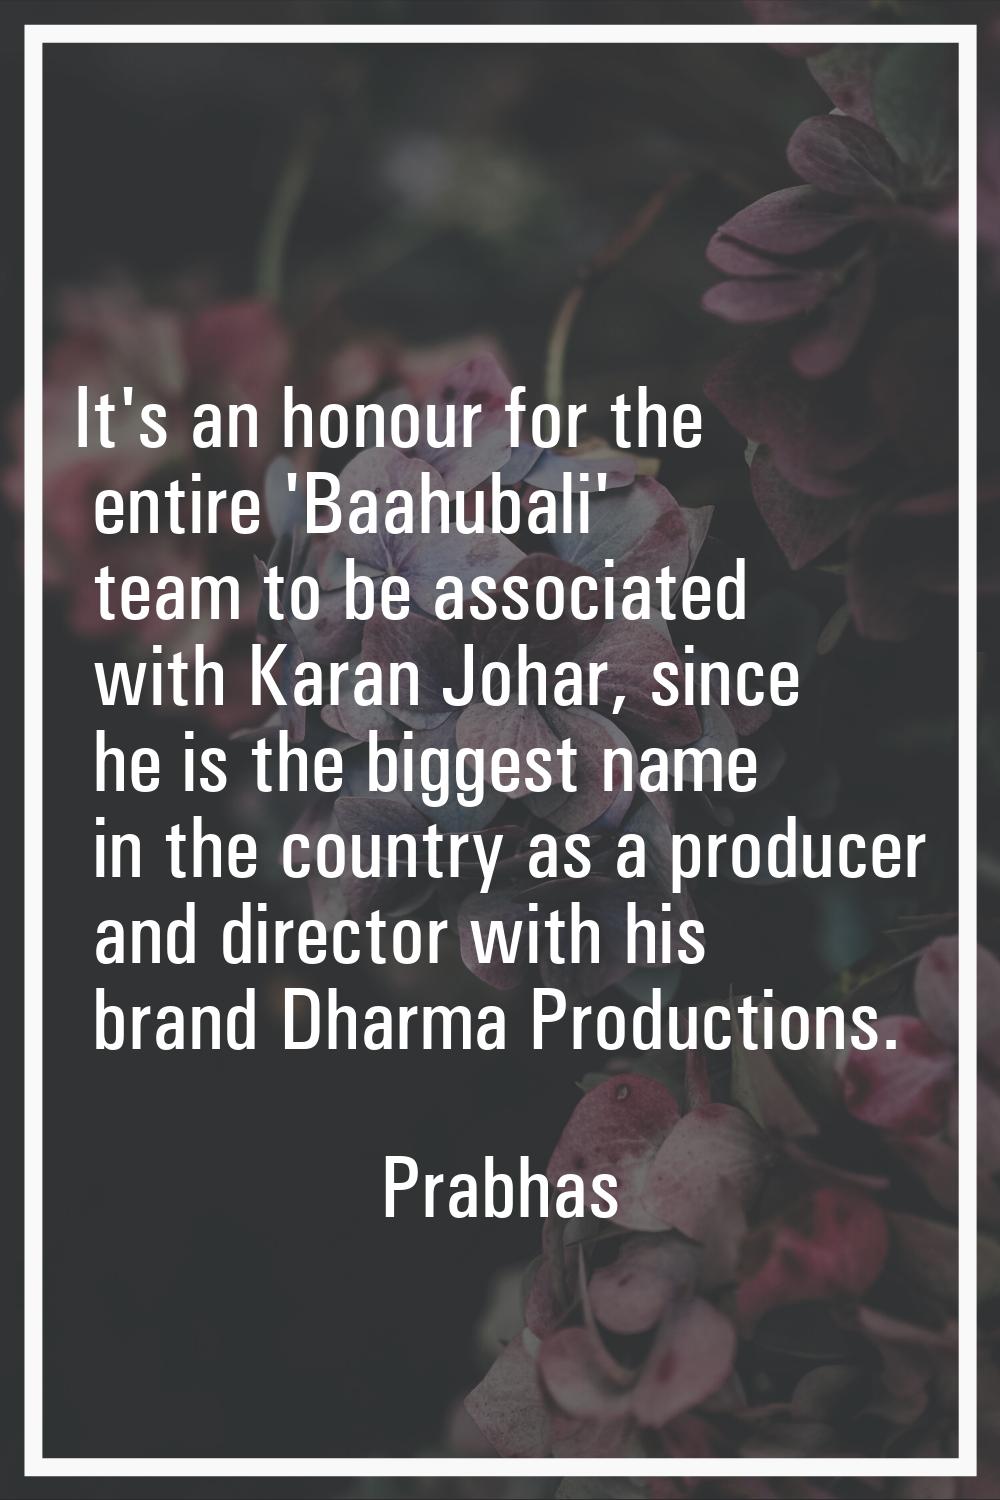 It's an honour for the entire 'Baahubali' team to be associated with Karan Johar, since he is the b